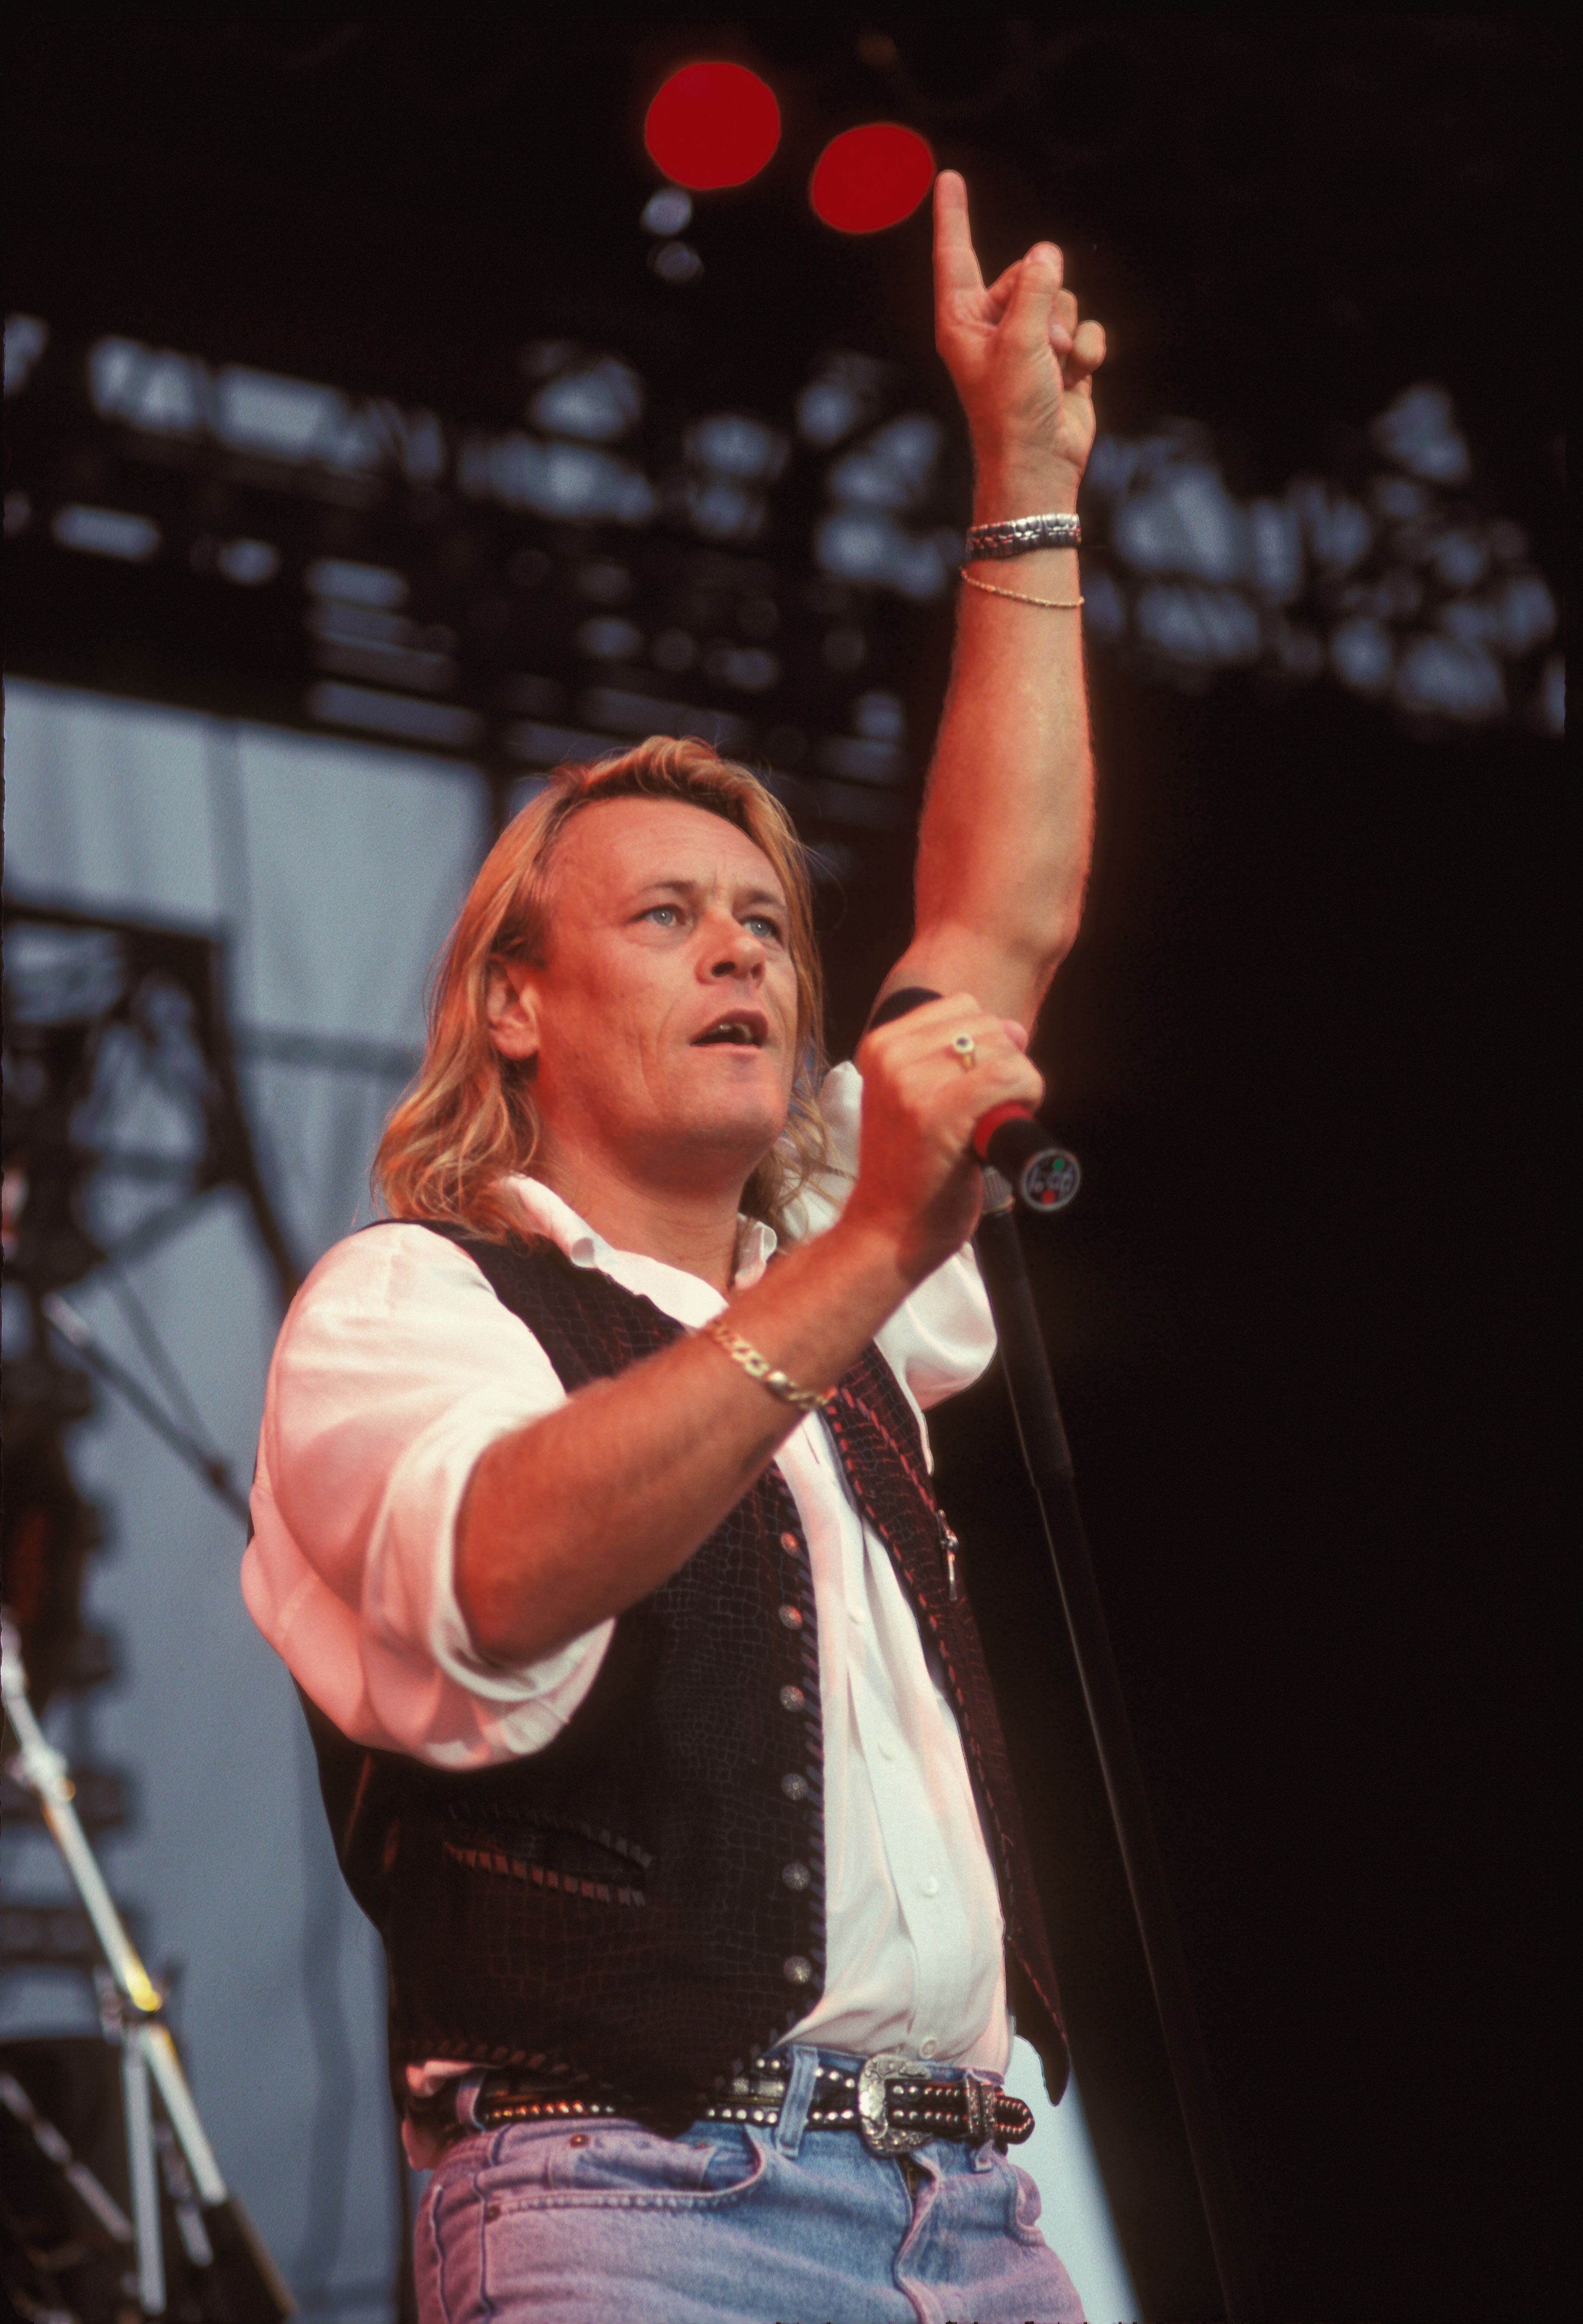 Singer Brian Howe performed on stage during a live concert appearance with Bad Company on July 26, 1990 | Photo: Getty Images